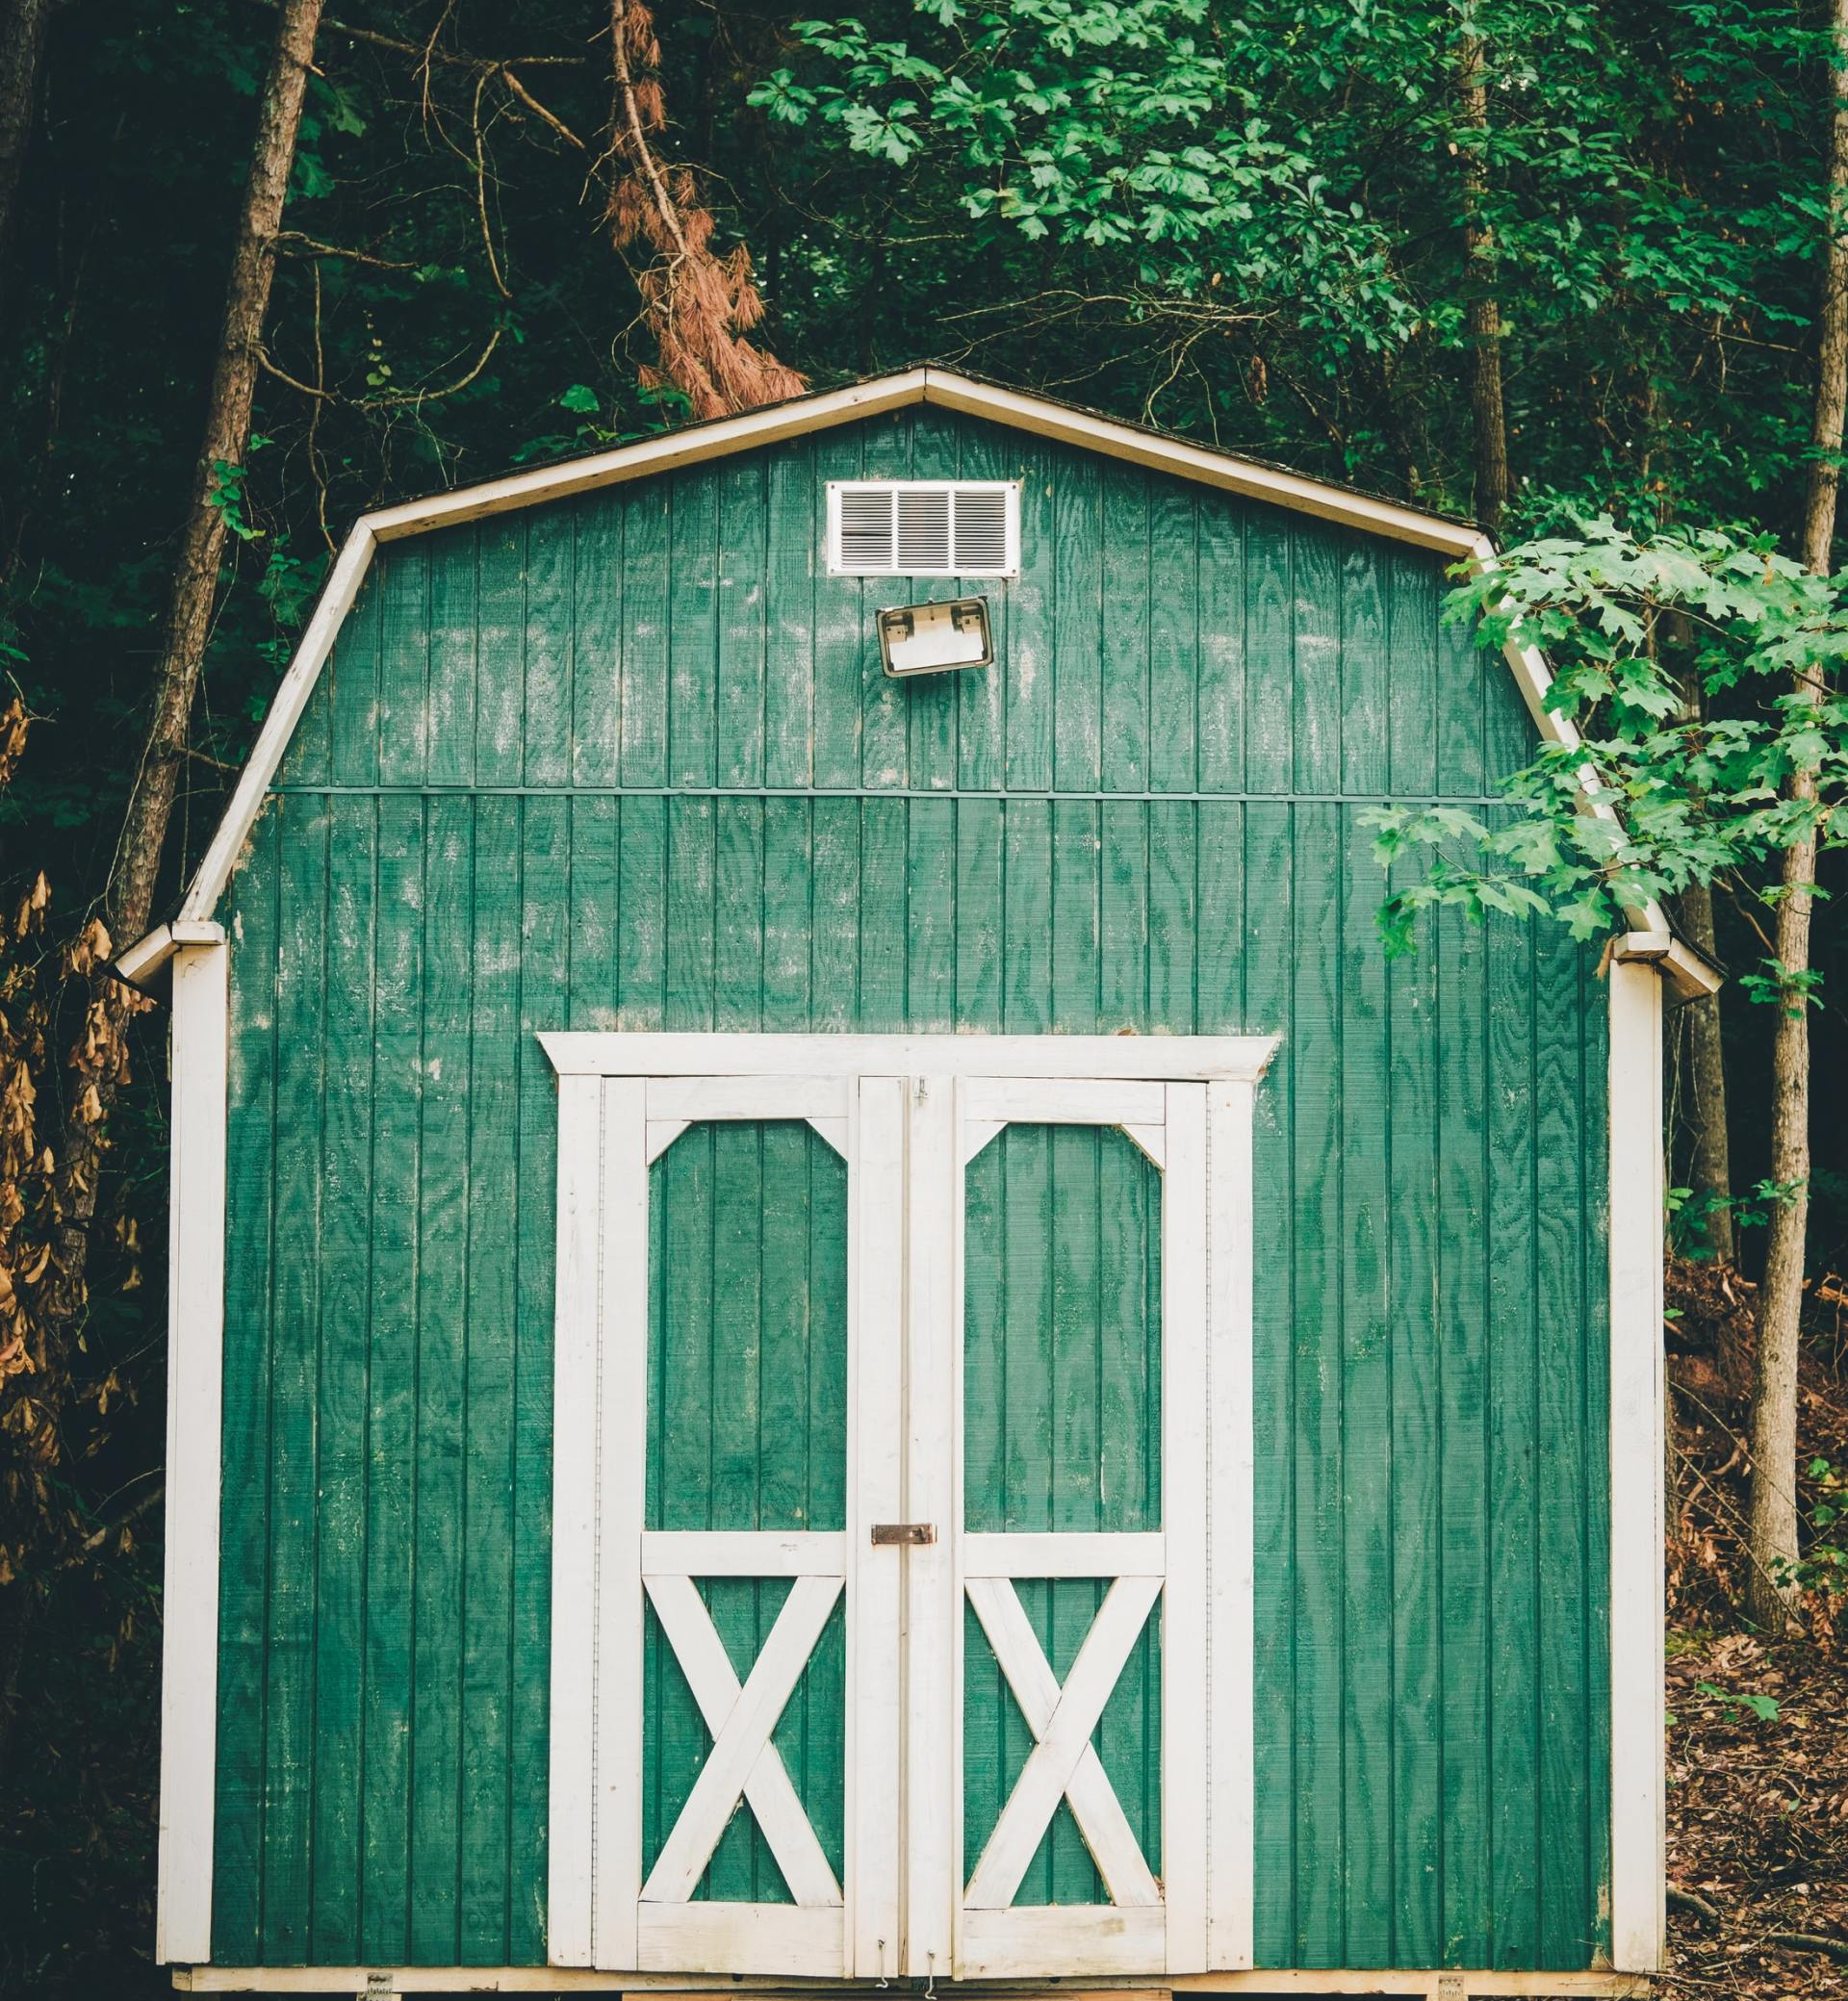 Spacious shed for storage or hobbies